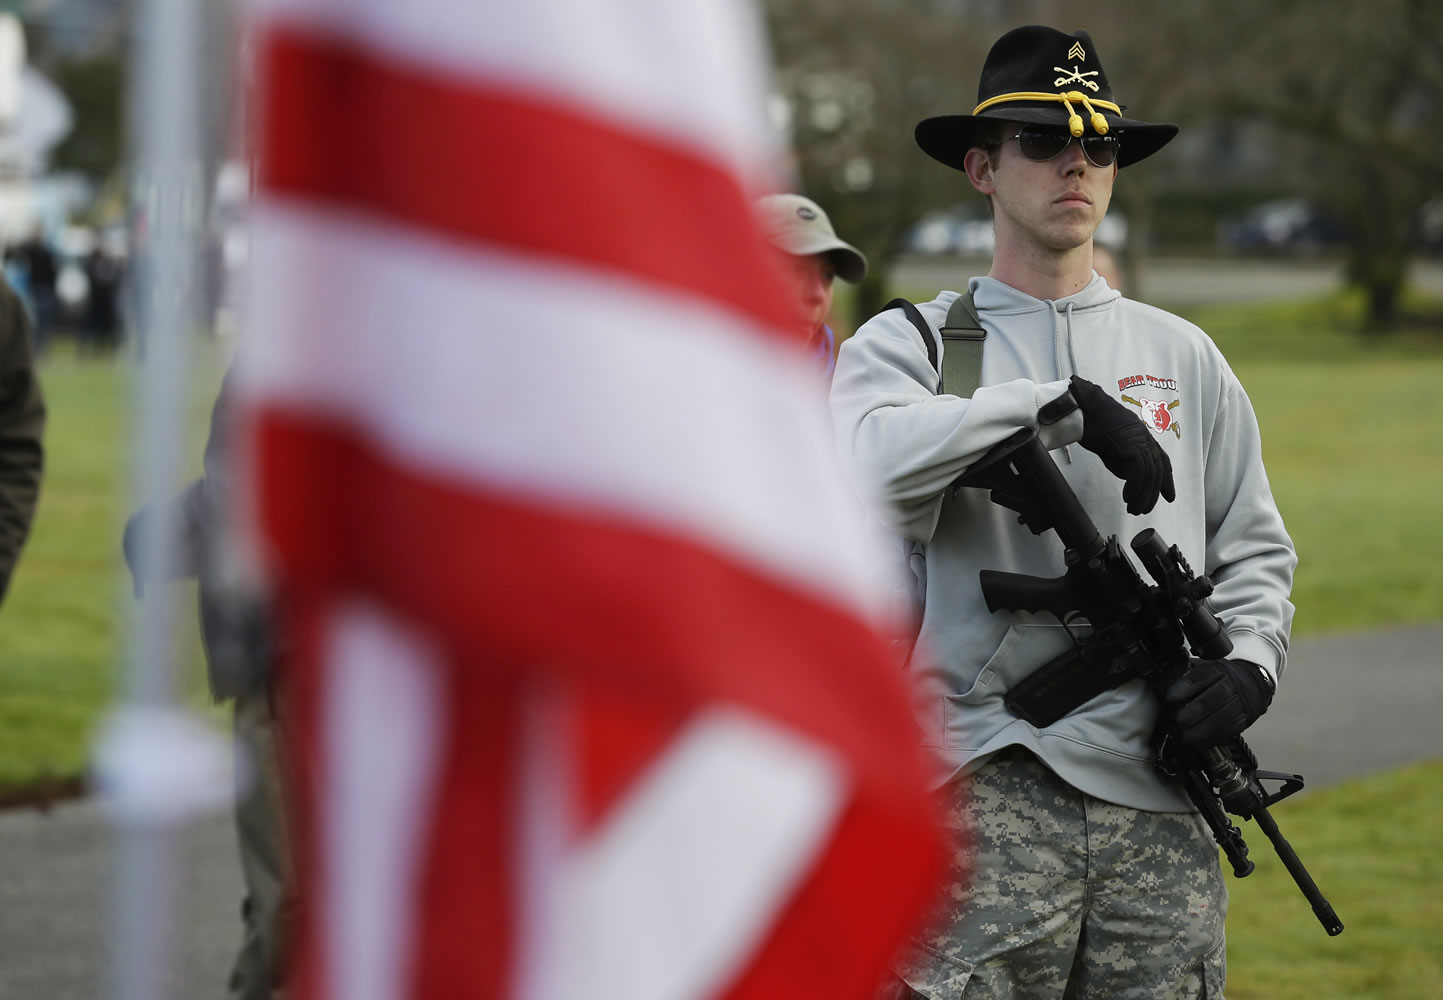 Ryan Brooks of Shelton holds his AR-15 rifle as he attends a gun rights rally Friday at the Capitol in Olympia.